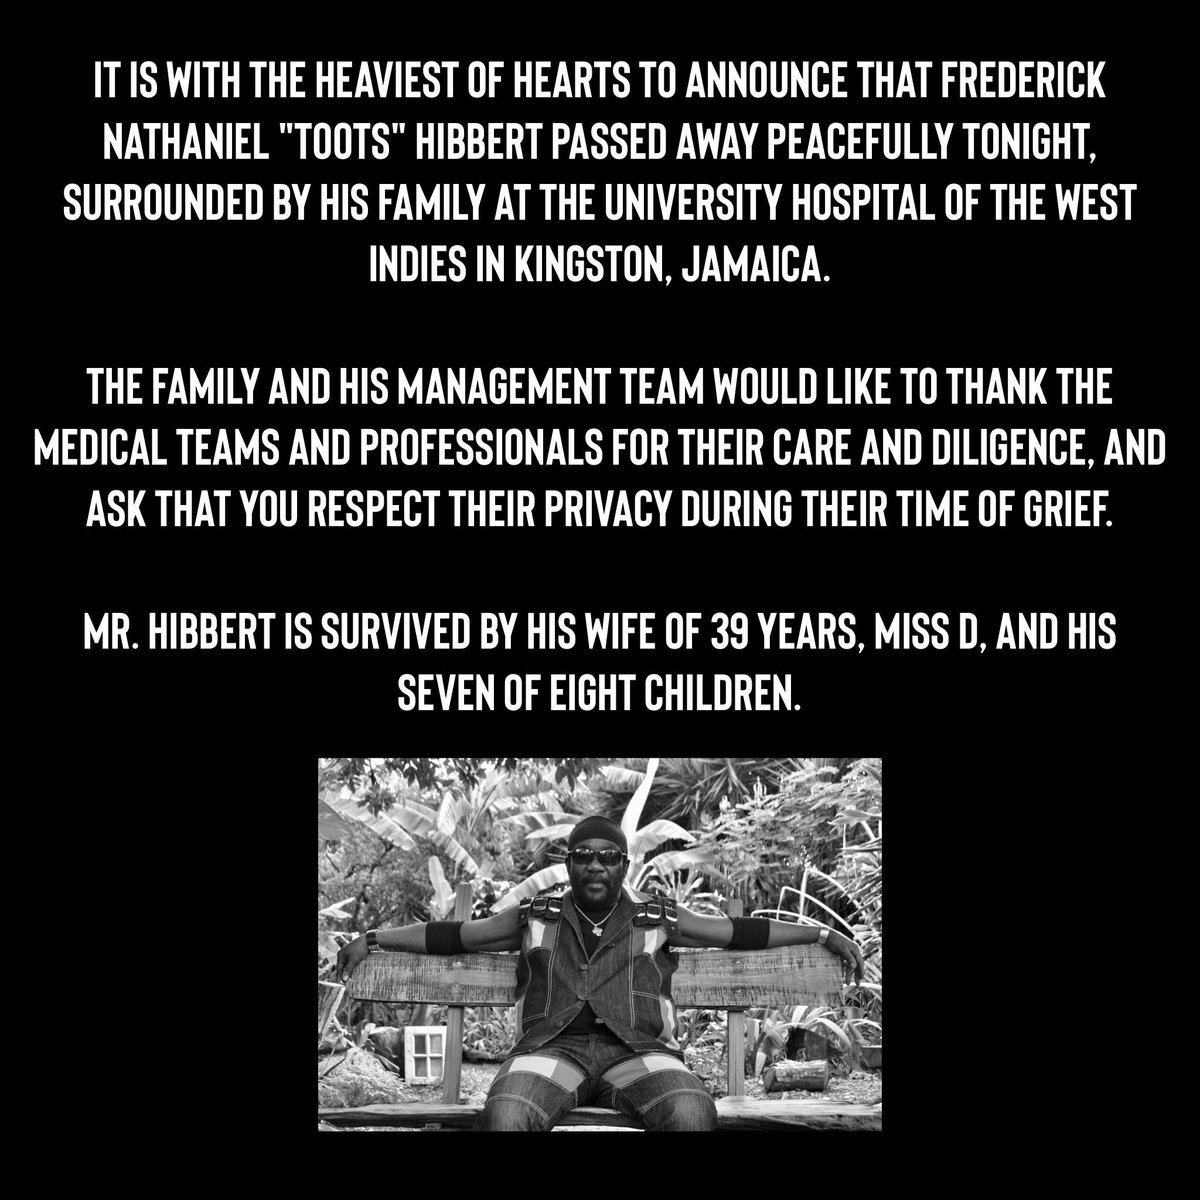 It is with the heaviest of hearts to announce that Frederick Nathaniel 'Toots' Hibbert passed away peacefully tonight, surrounded by his family at the University Hospital of the West Indies in Kingston, Jamaica...